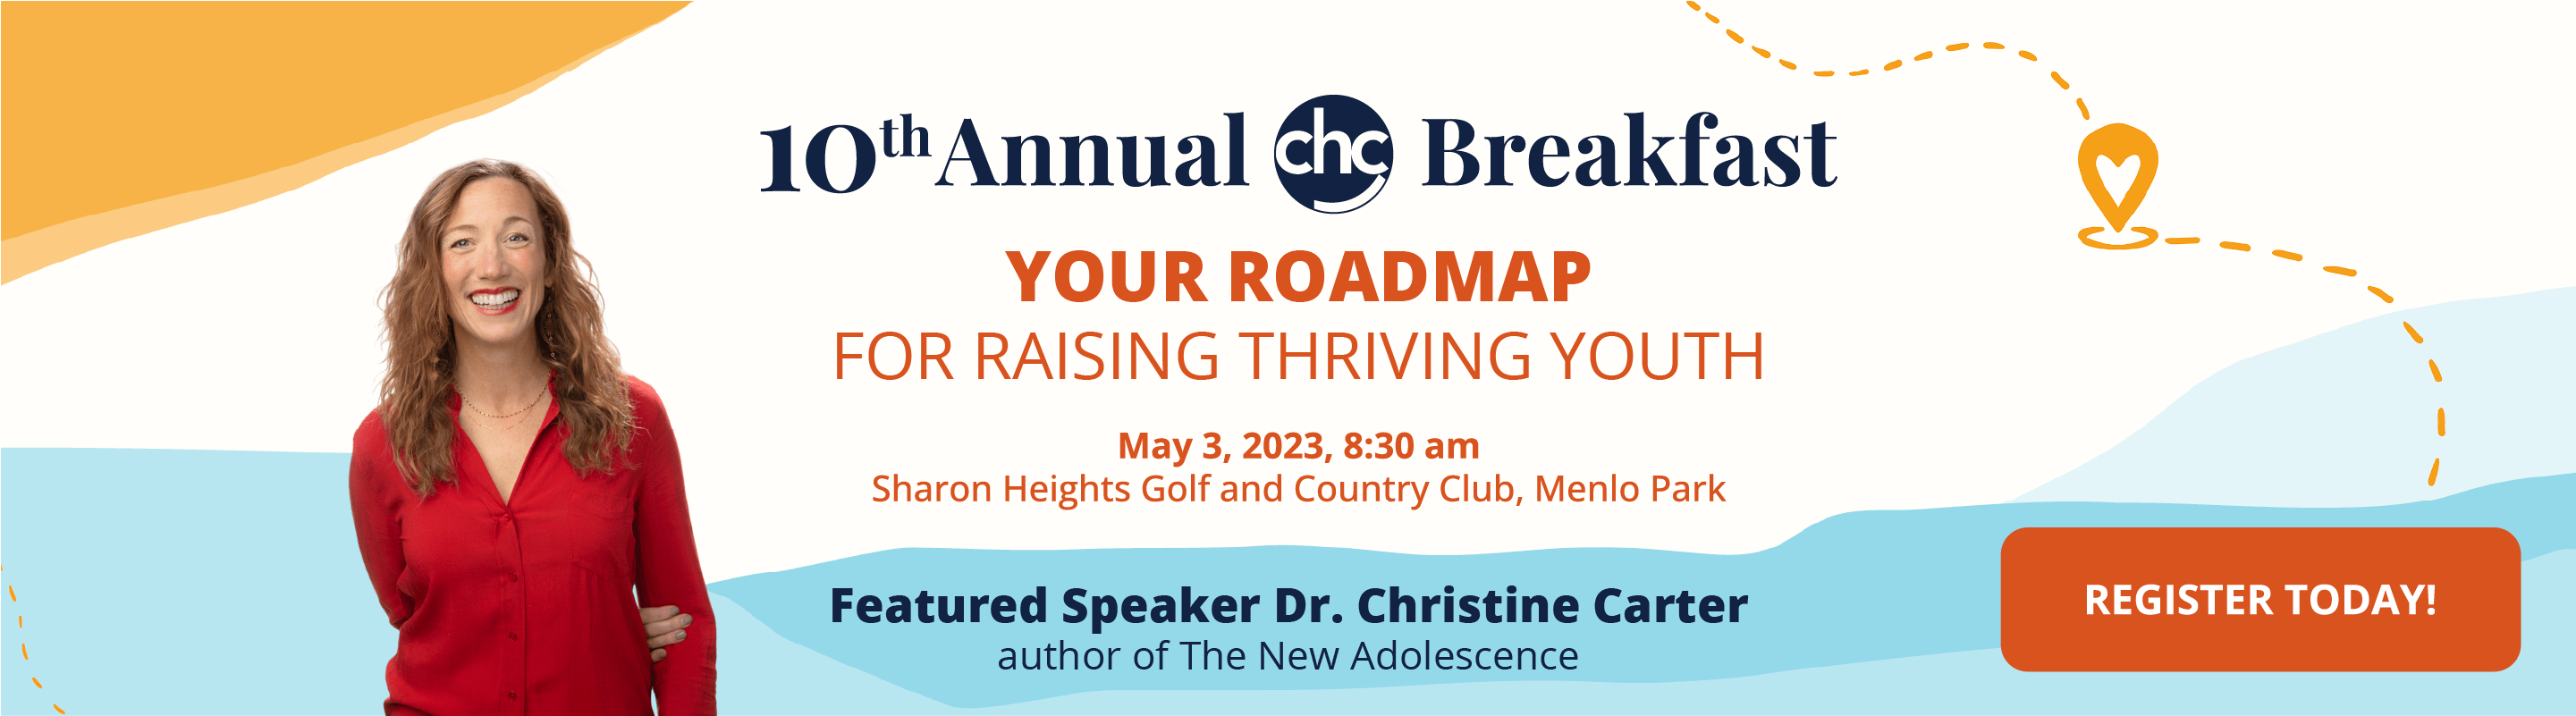 10th Annual CHC Breakfast. Your Roadmap for Raising Thriving Youth. May 3, 2023, 8:30 am. Sharon Heights Golf and Country Club, Menlo Park. Featured Speaker Dr. Christine Carter. Author of The New Adolescence. Register Today!